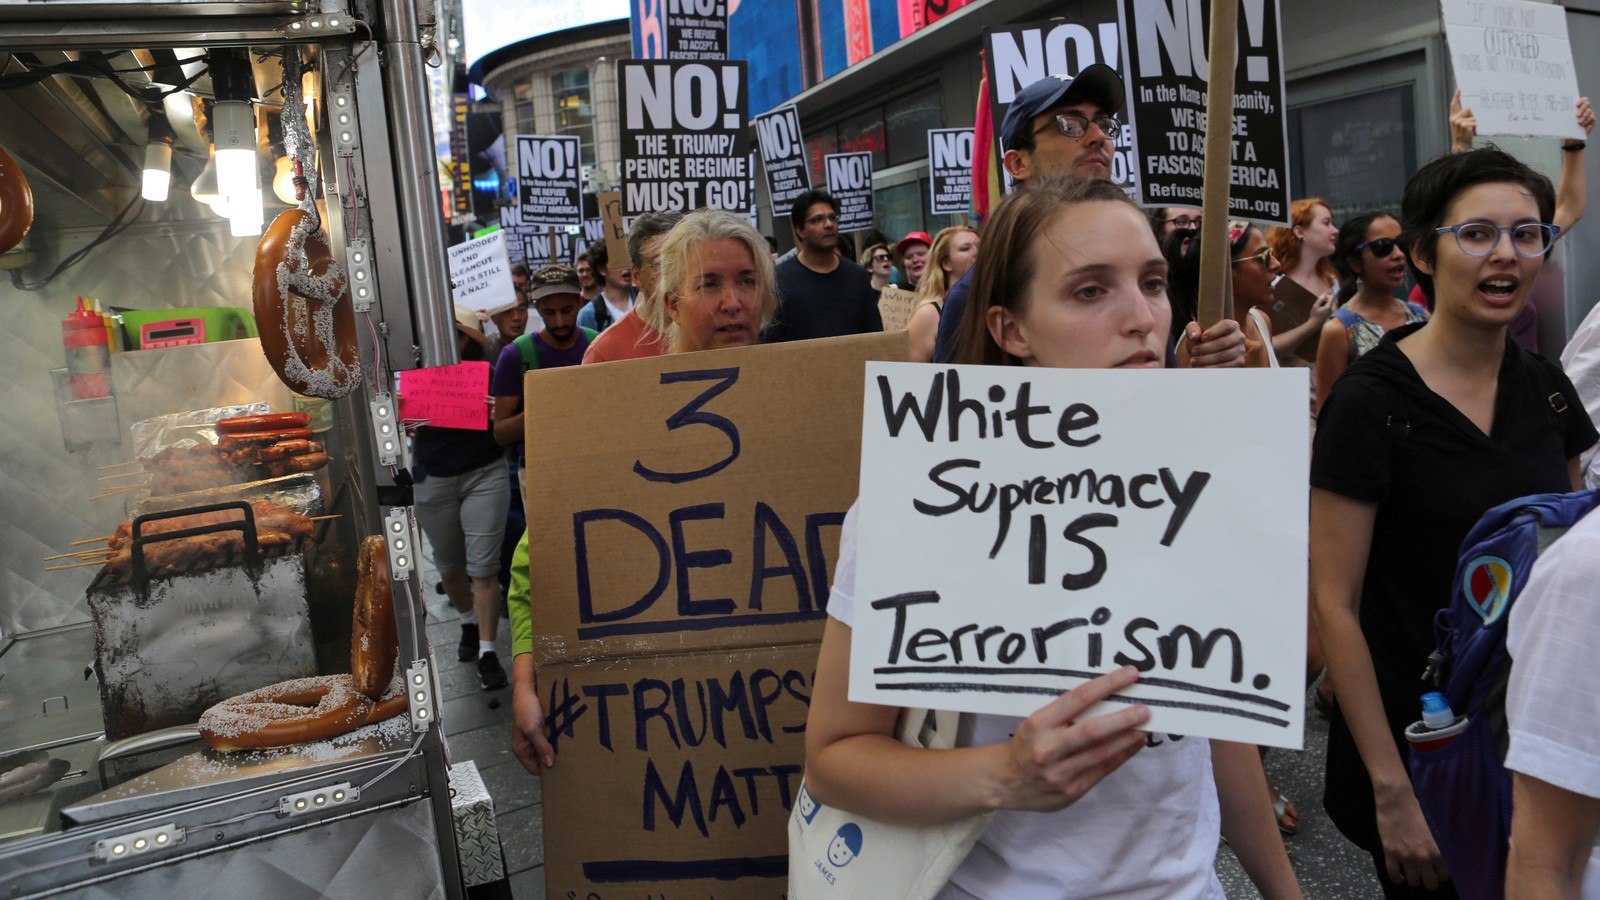 Altercation: Social Media and White Supremacist Terrorism - The